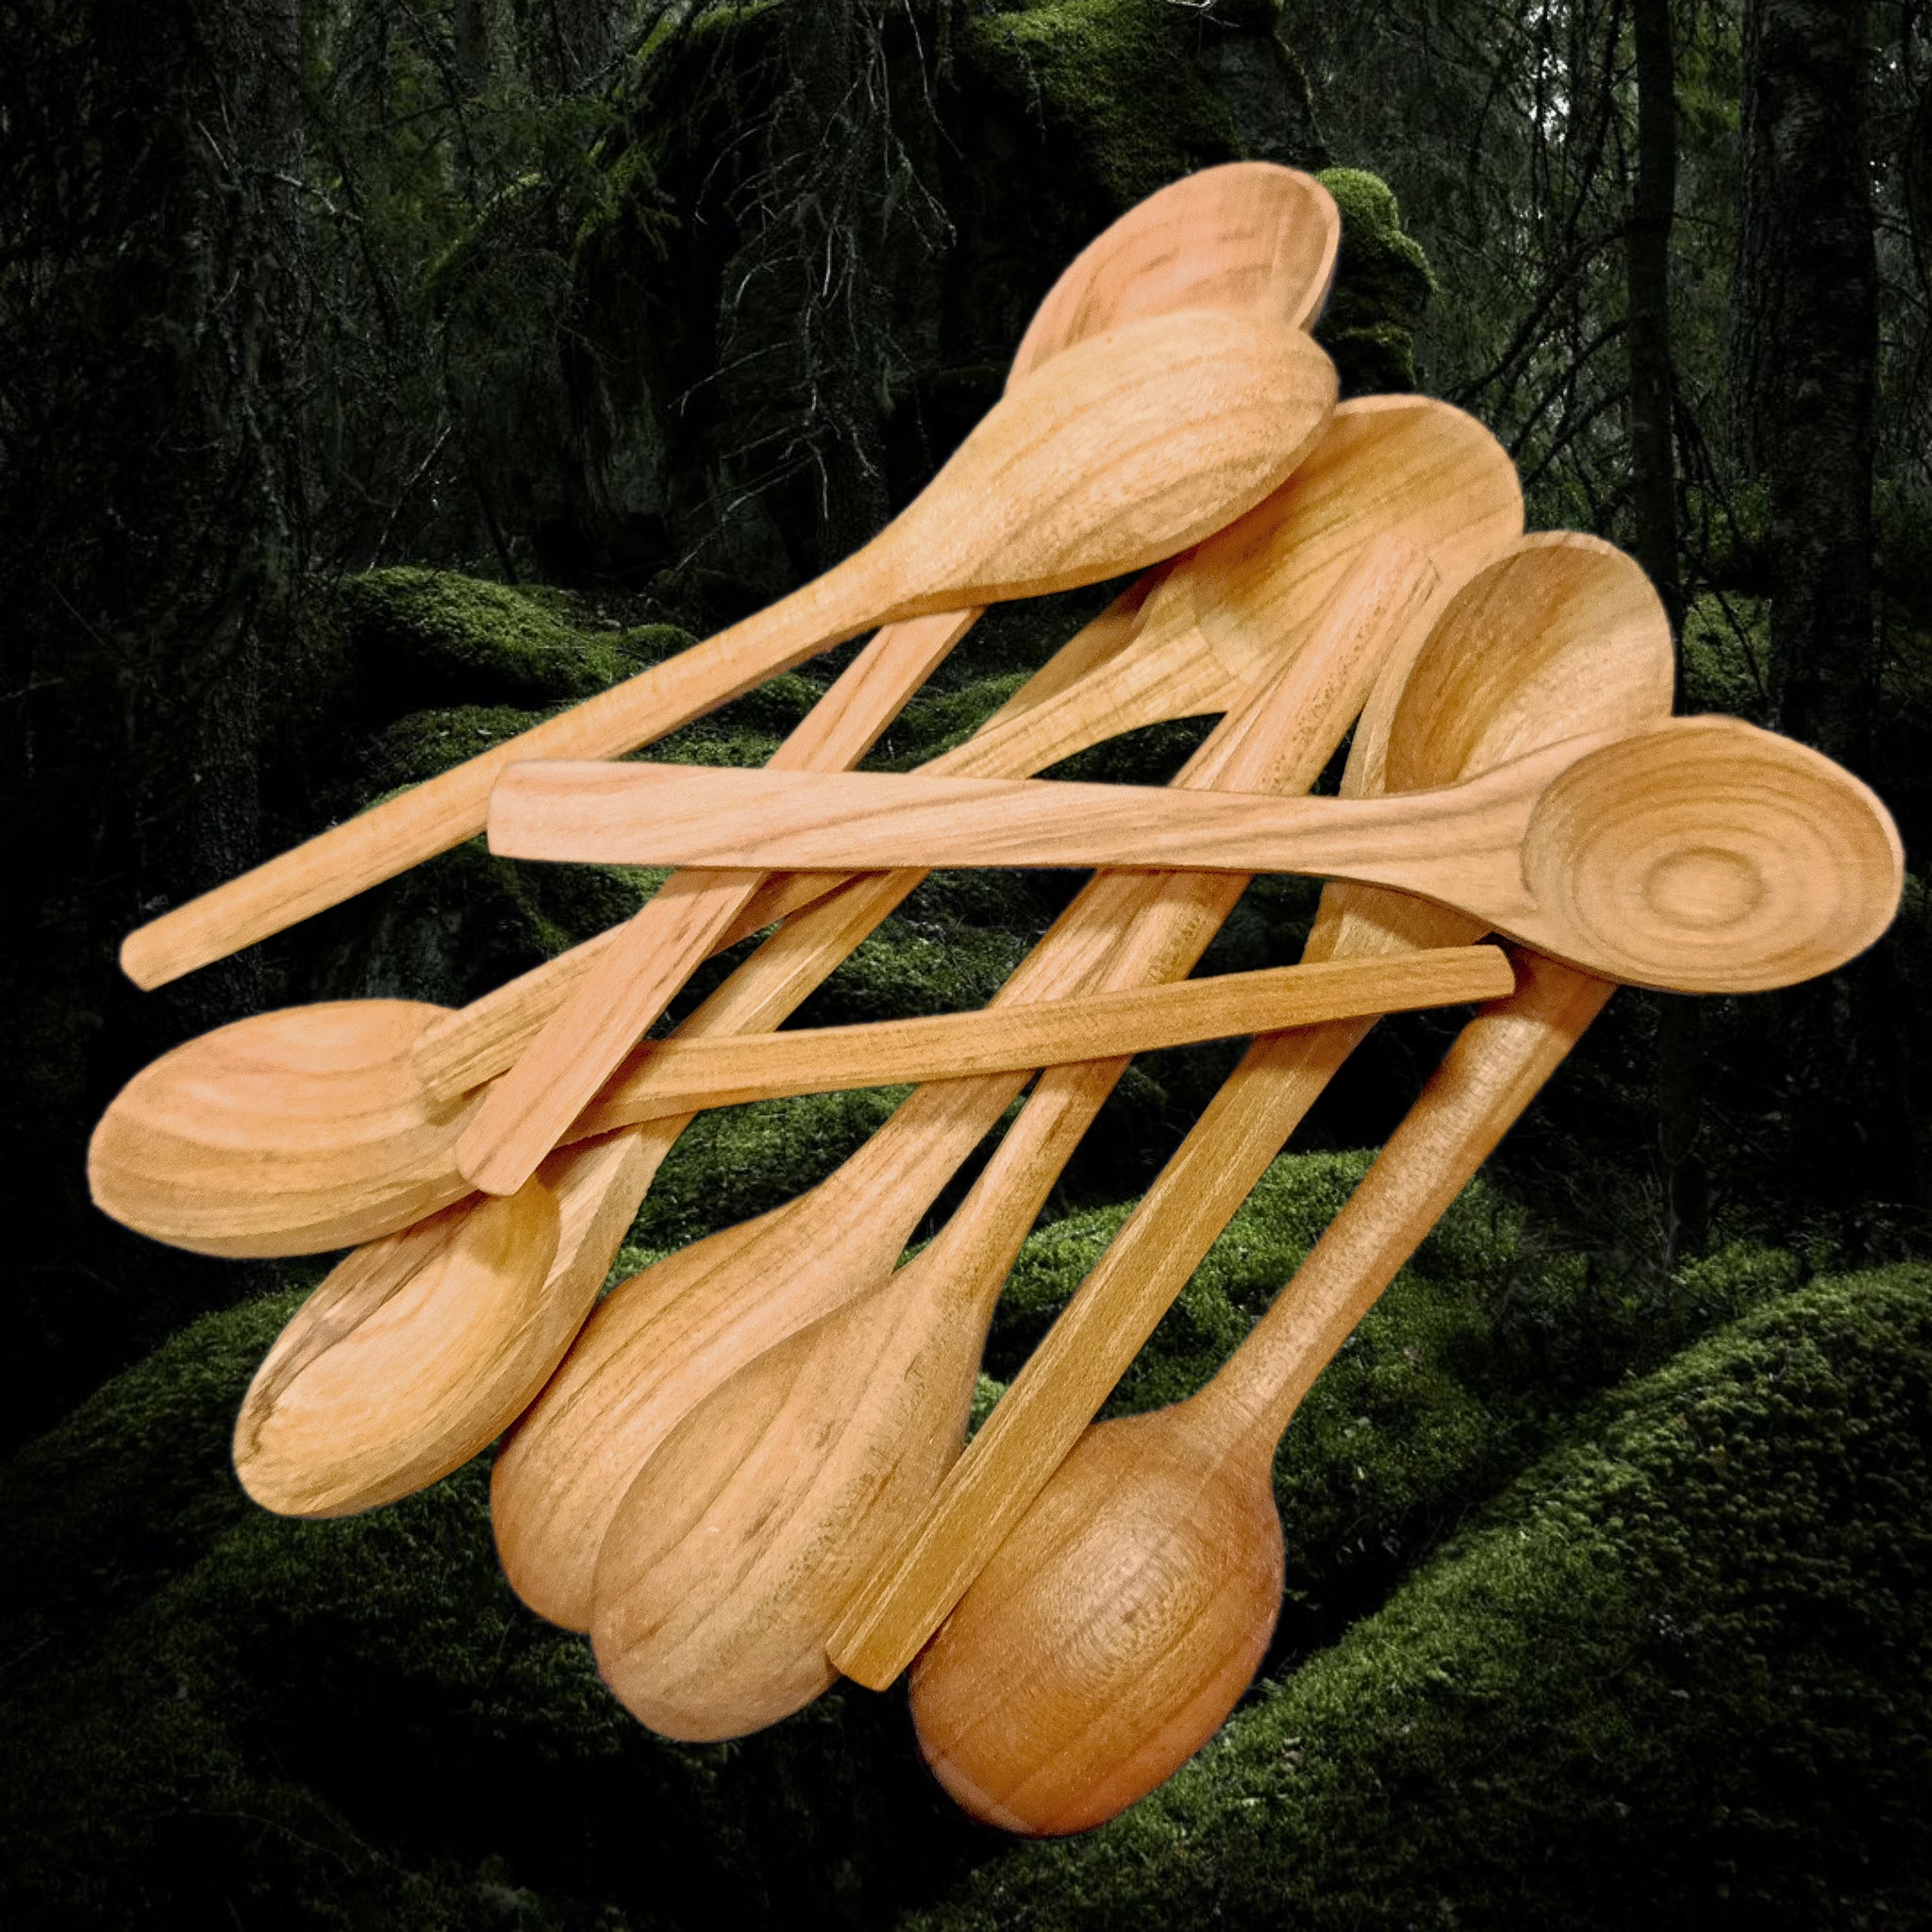 Cherry Wood Viking / Medieval Spoons - Selection of Stock